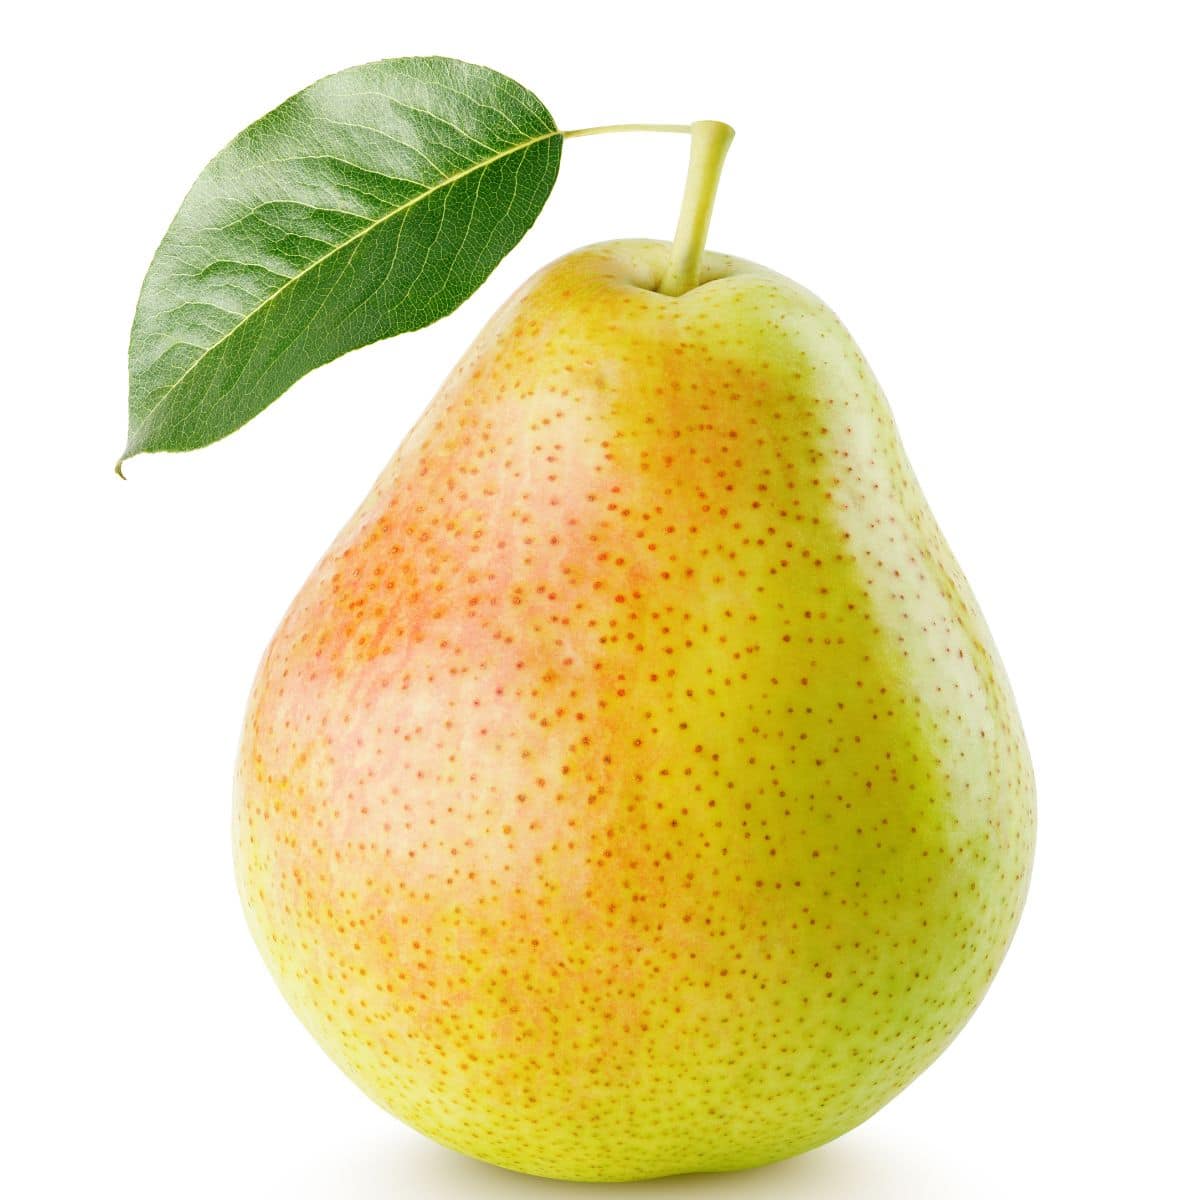 harrow sweet pear on a white background.